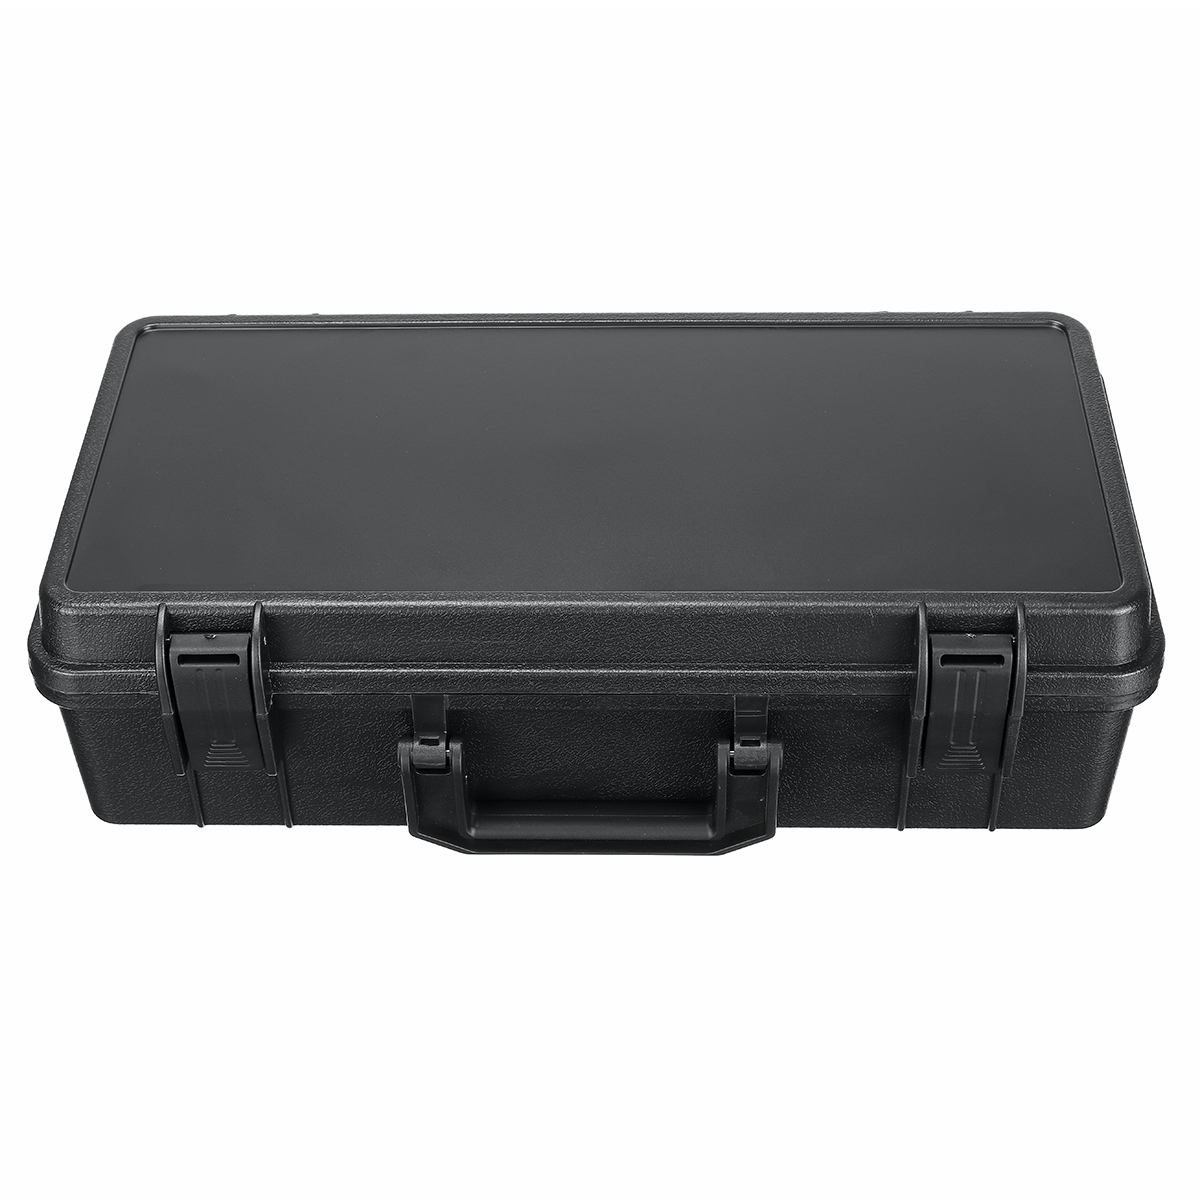 Find Black Safety Protective Box Abs Plastic Tool Box Slr Camera Equipment Box Plastic Tool Box for Sale on Gipsybee.com with cryptocurrencies